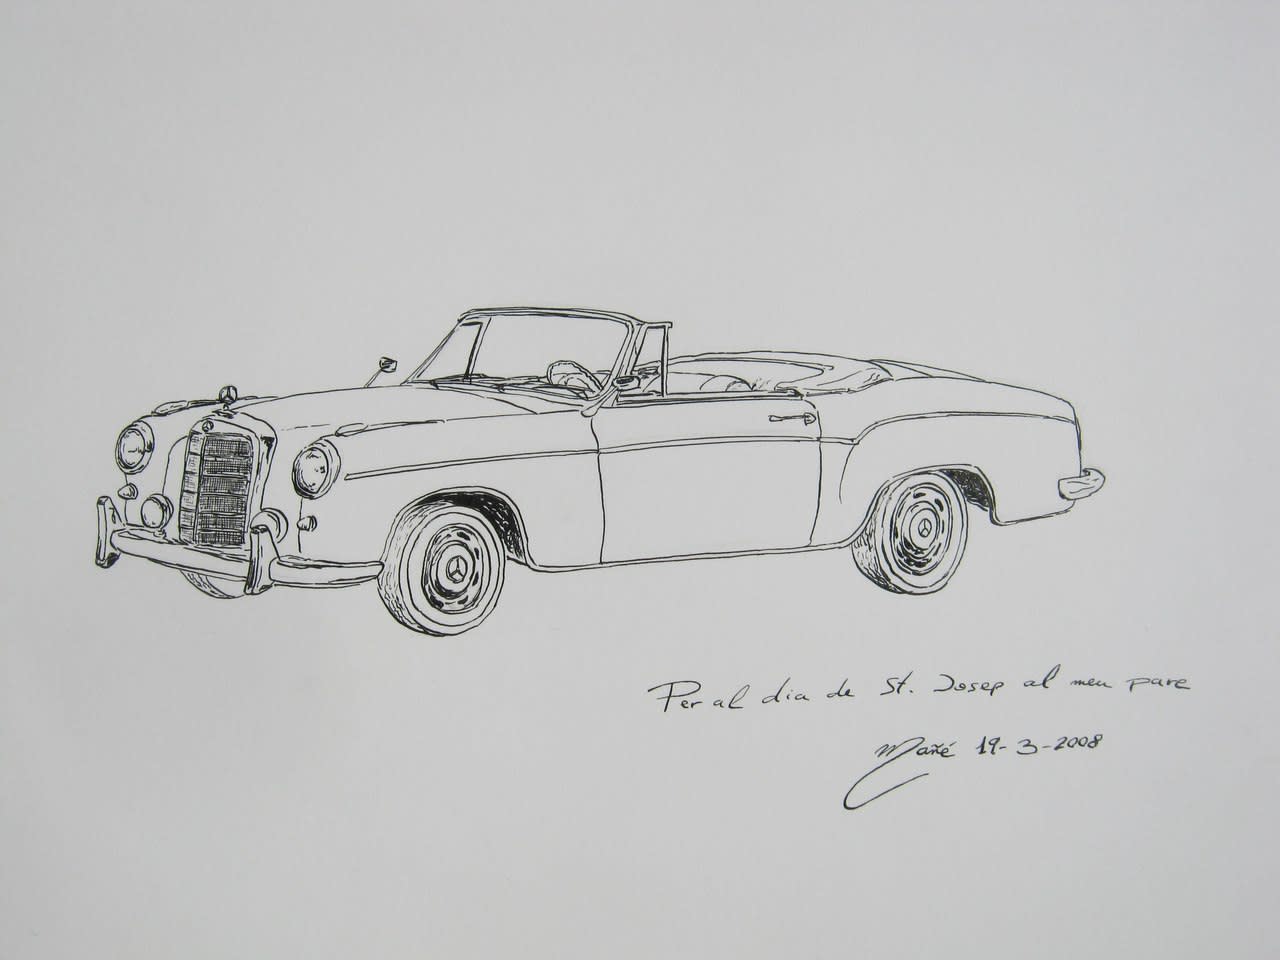 1959 Mercedes-Benz 220 S Cabriolet: pencil painting by Joan Mañe • ALL ANDORRA